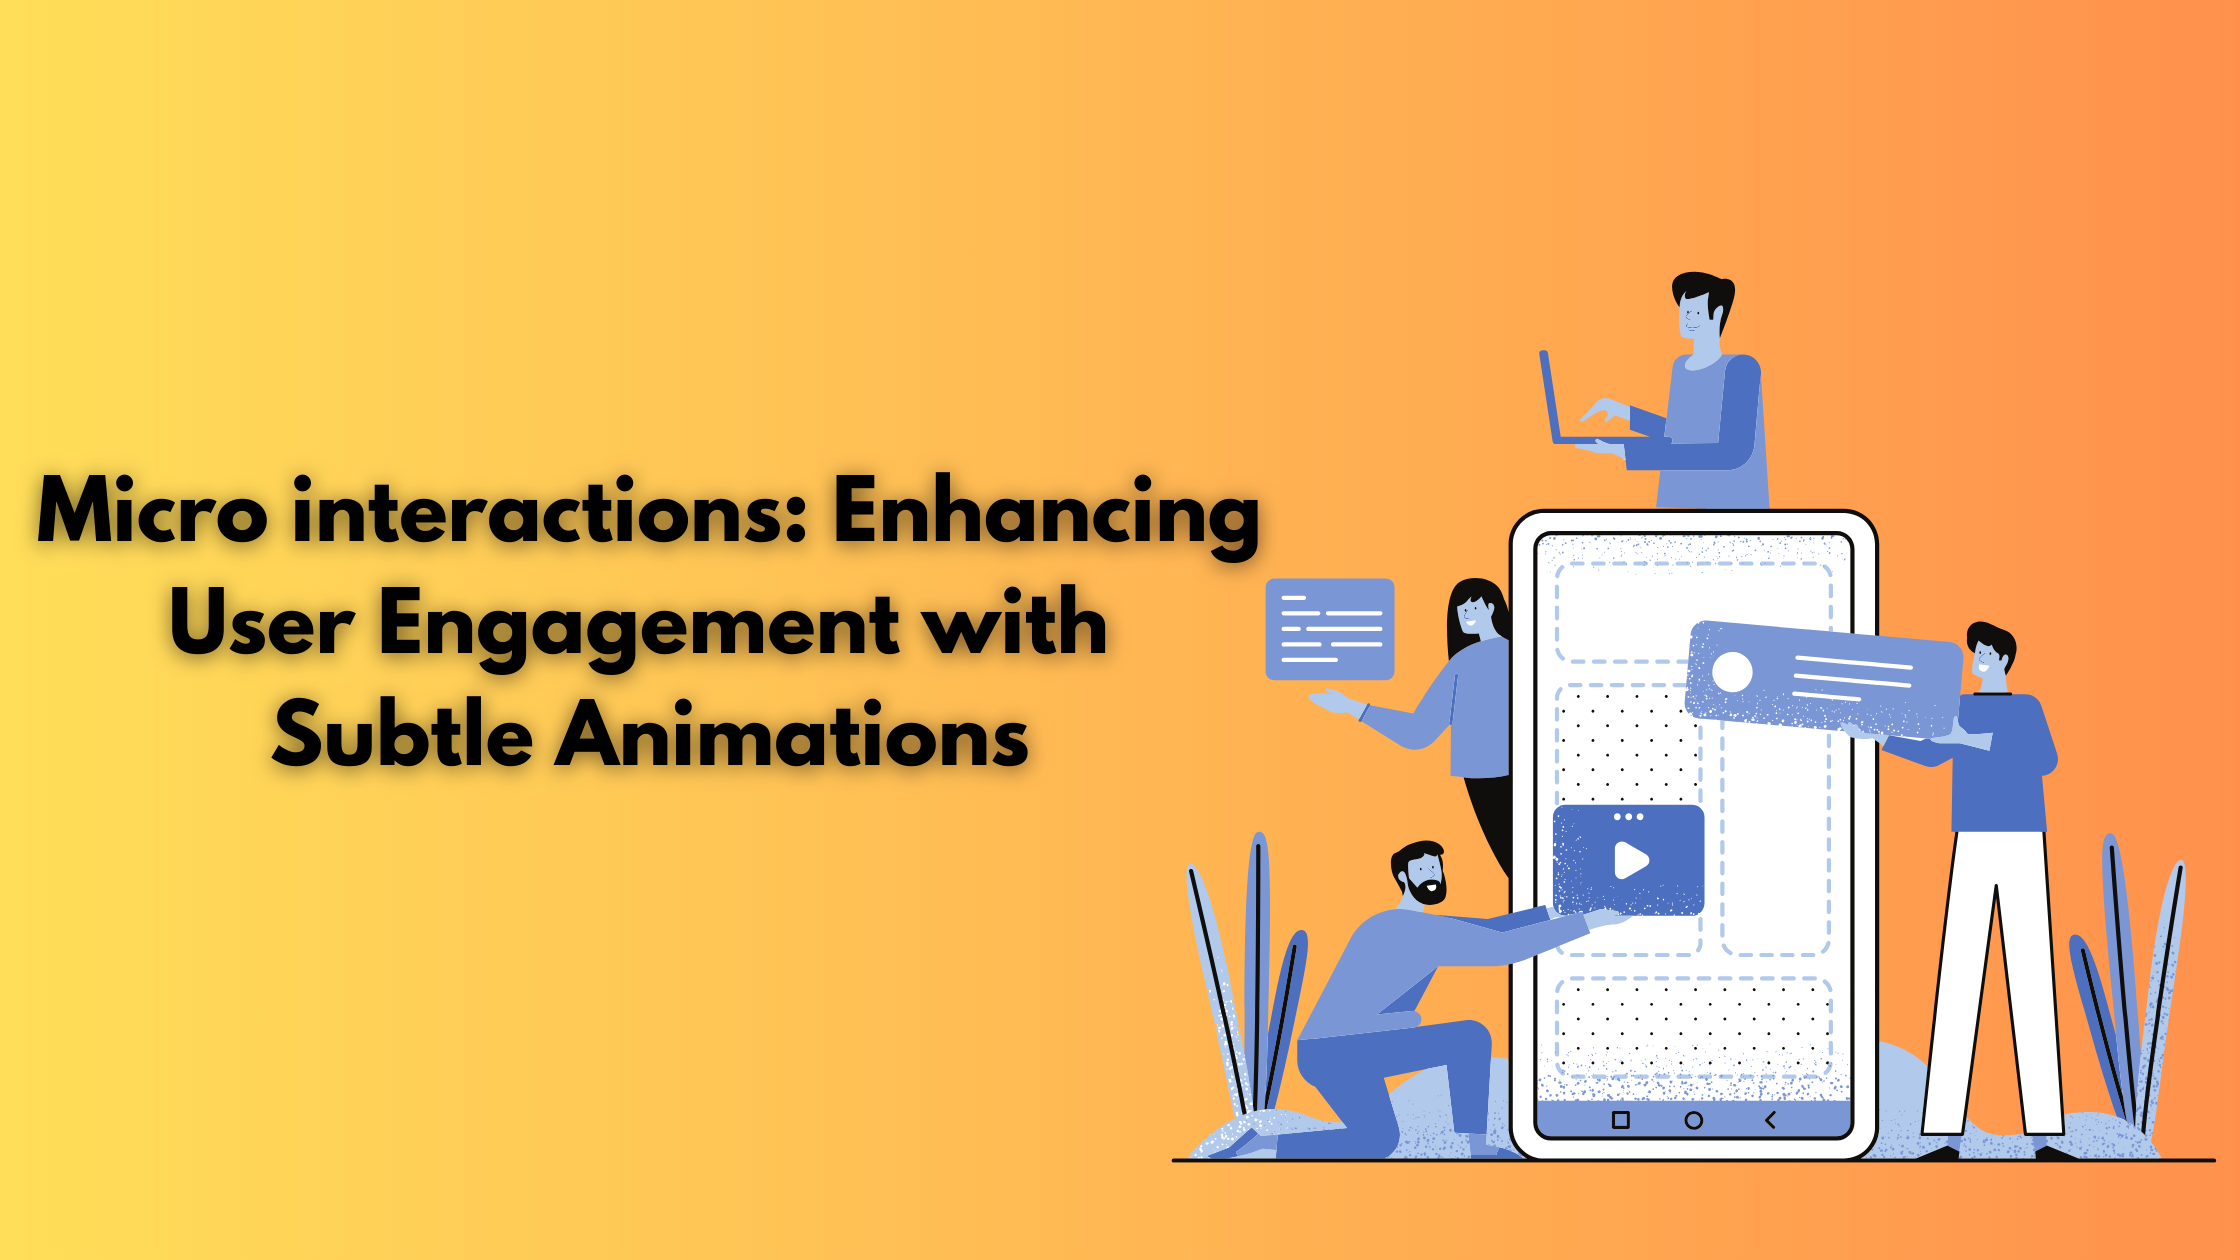 Microinteractions: Enhancing User Engagement with subtle animation